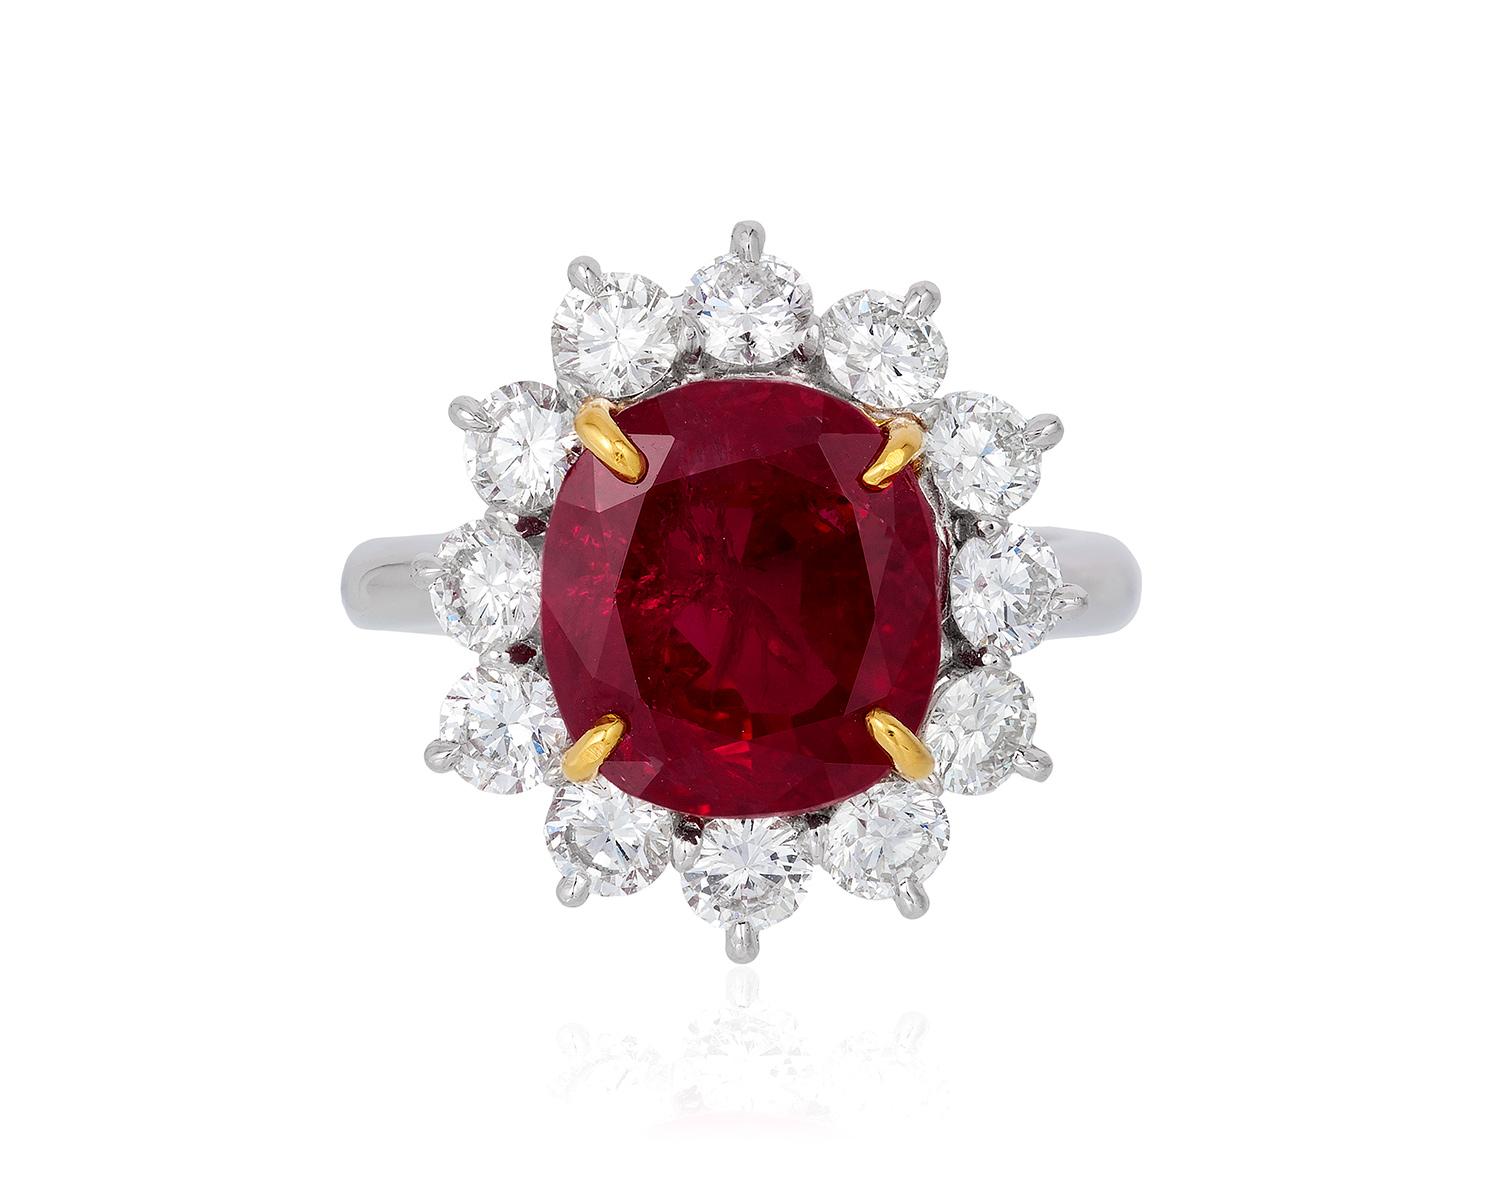 Andreoli GIA Certified 6.03 Carat Burma Ruby Diamond Platinum Ring

This ring features:
- 6.03ct Ruby Burma No Heat
- 1.65ct Diamond
- 9.00g Platinum
- GIA Certificate
- Made In Italy